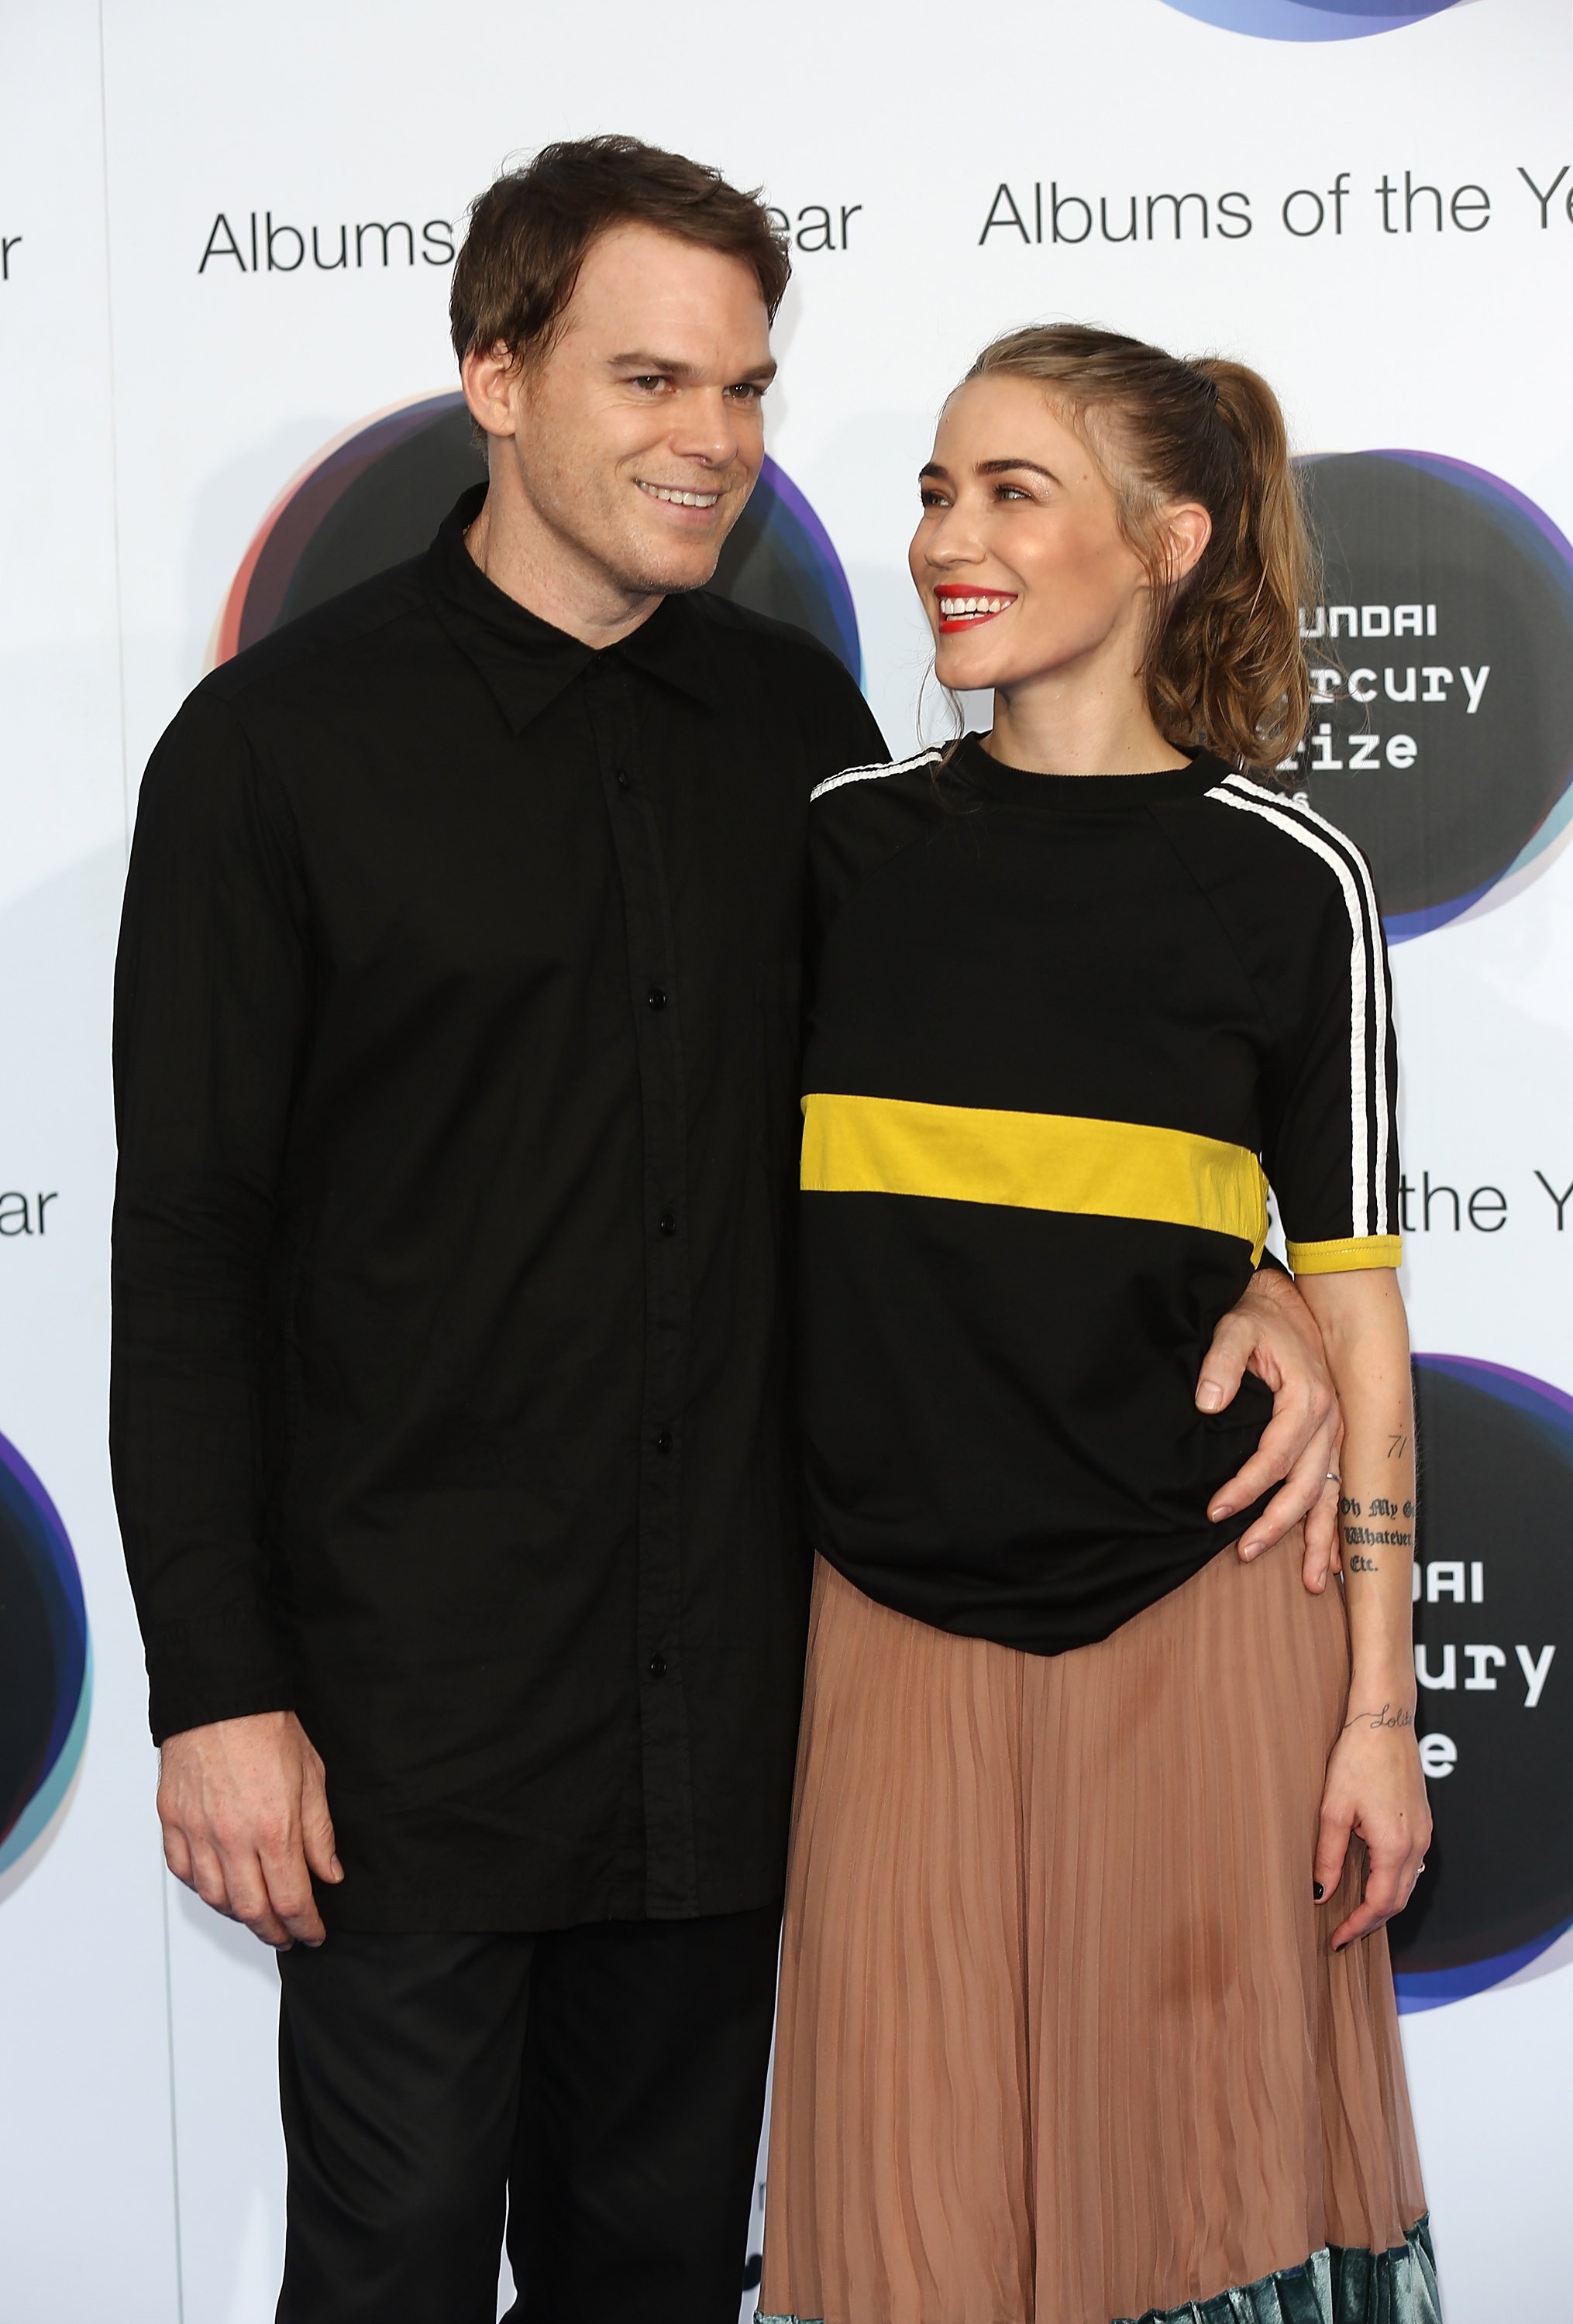 Michael C Hall and his wife Morgan MacGregor pose for a photo at the Hyundai Mercury Prize 2016 on September 15, 2016 in London | Source: Getty Images